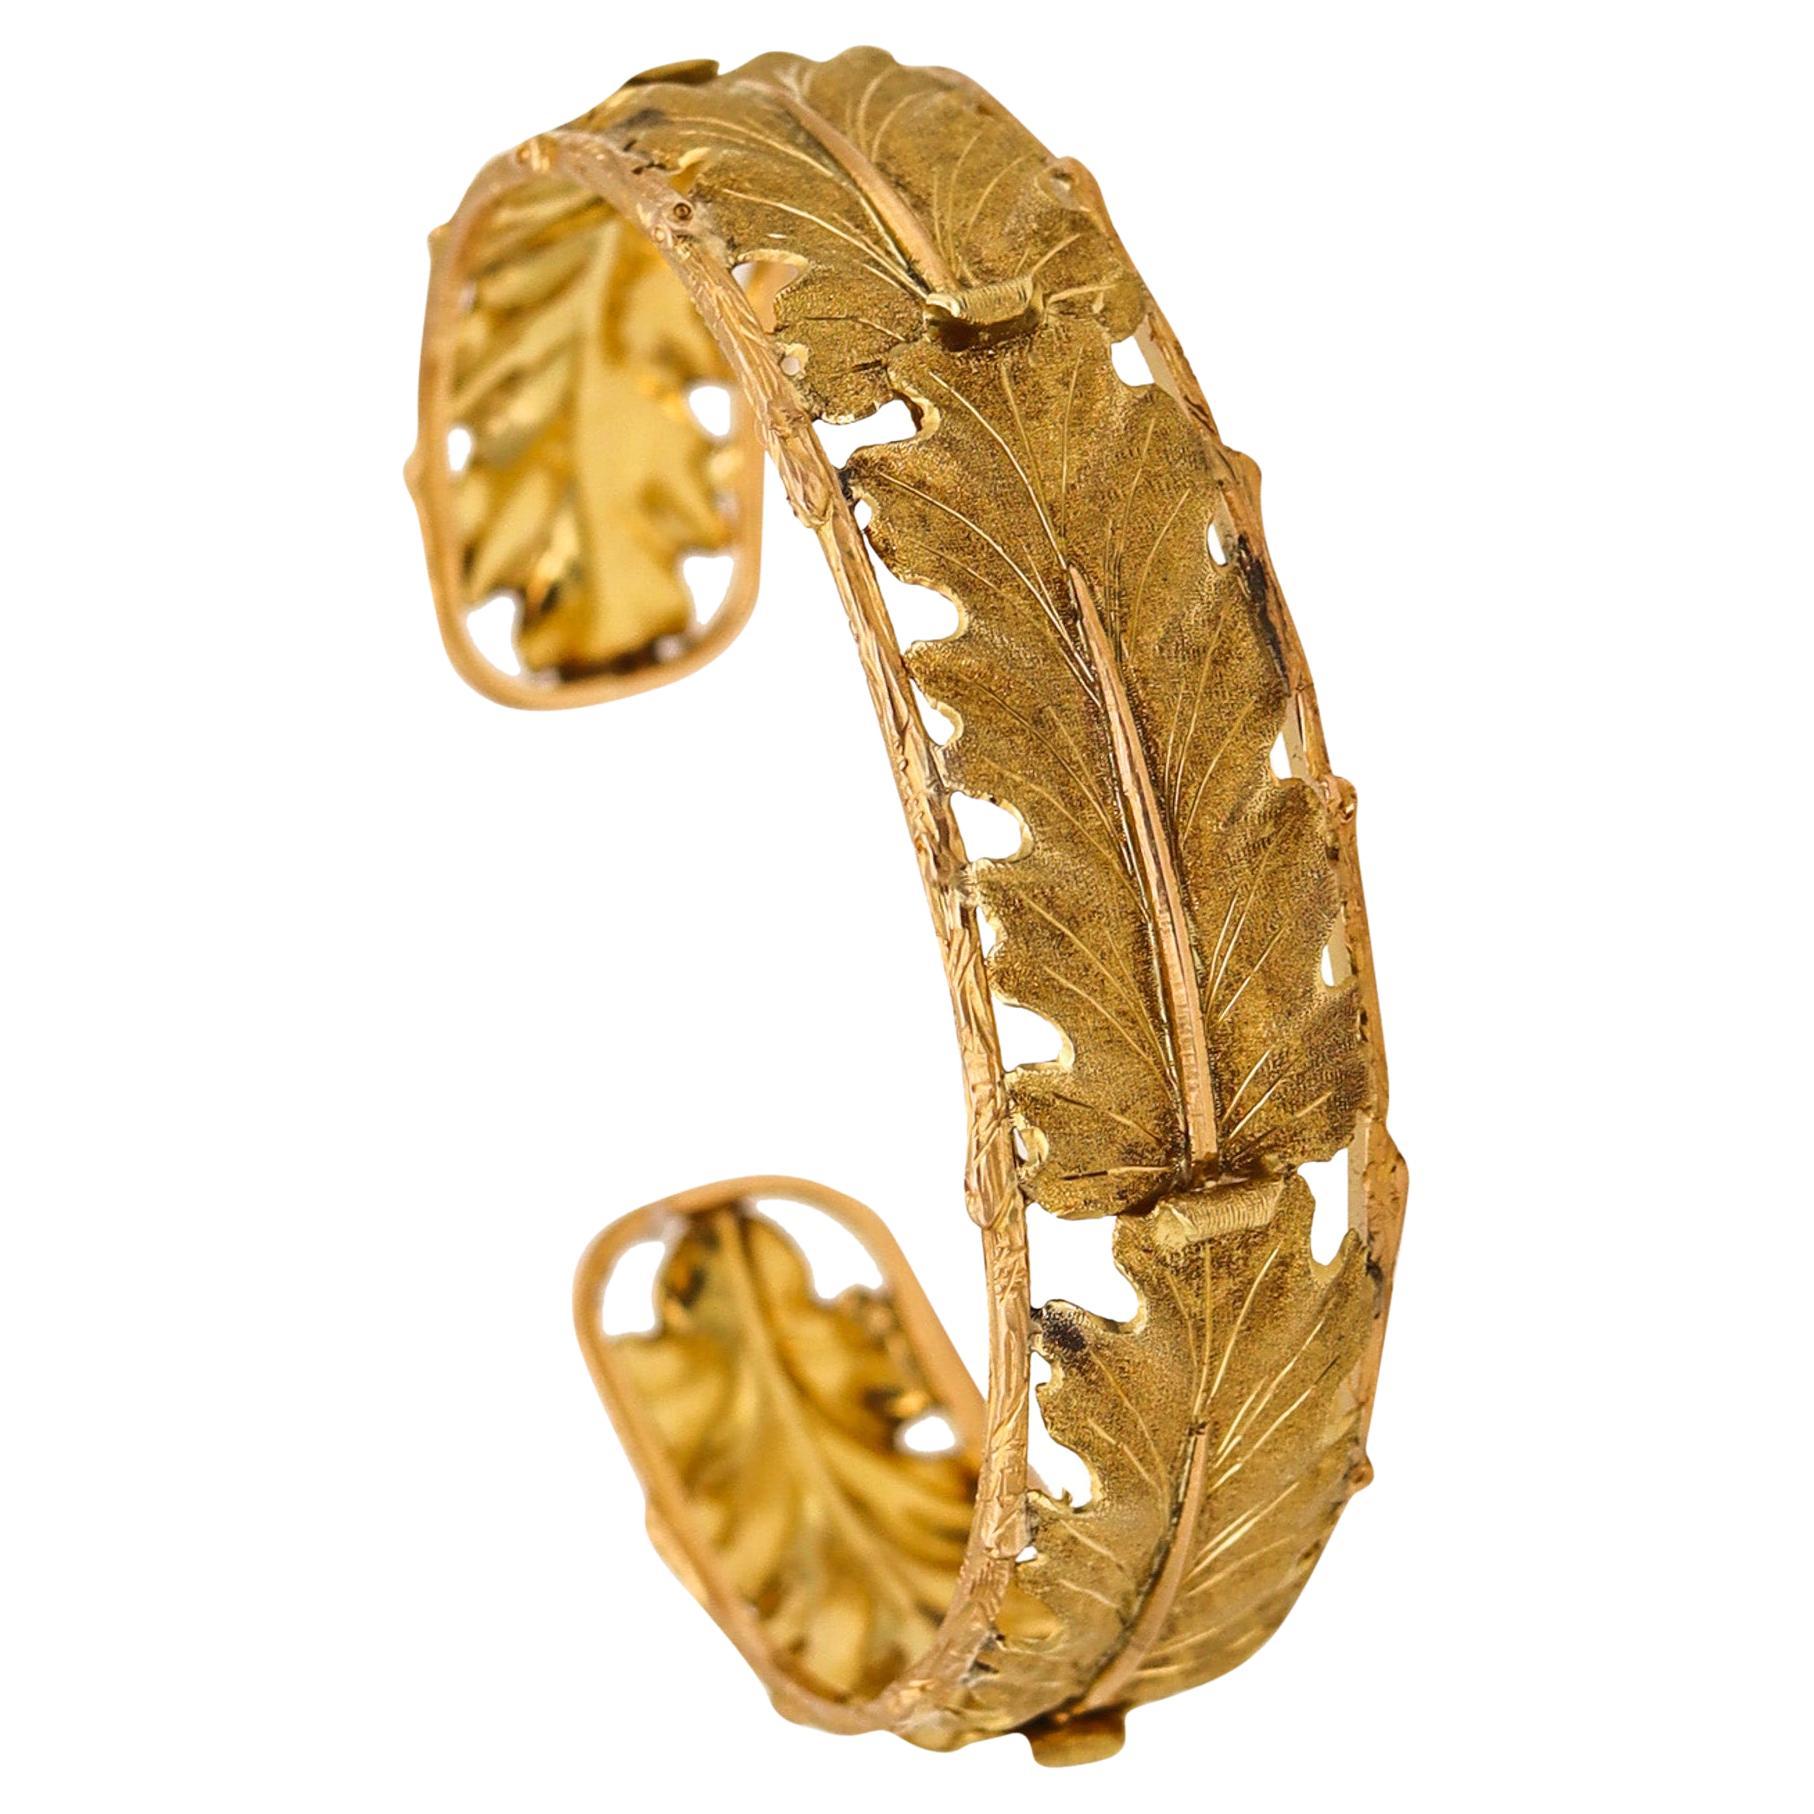 Mario Buccellati 1970 Milano Bracelet with Organic Leaves Motifs in 18k Gold For Sale